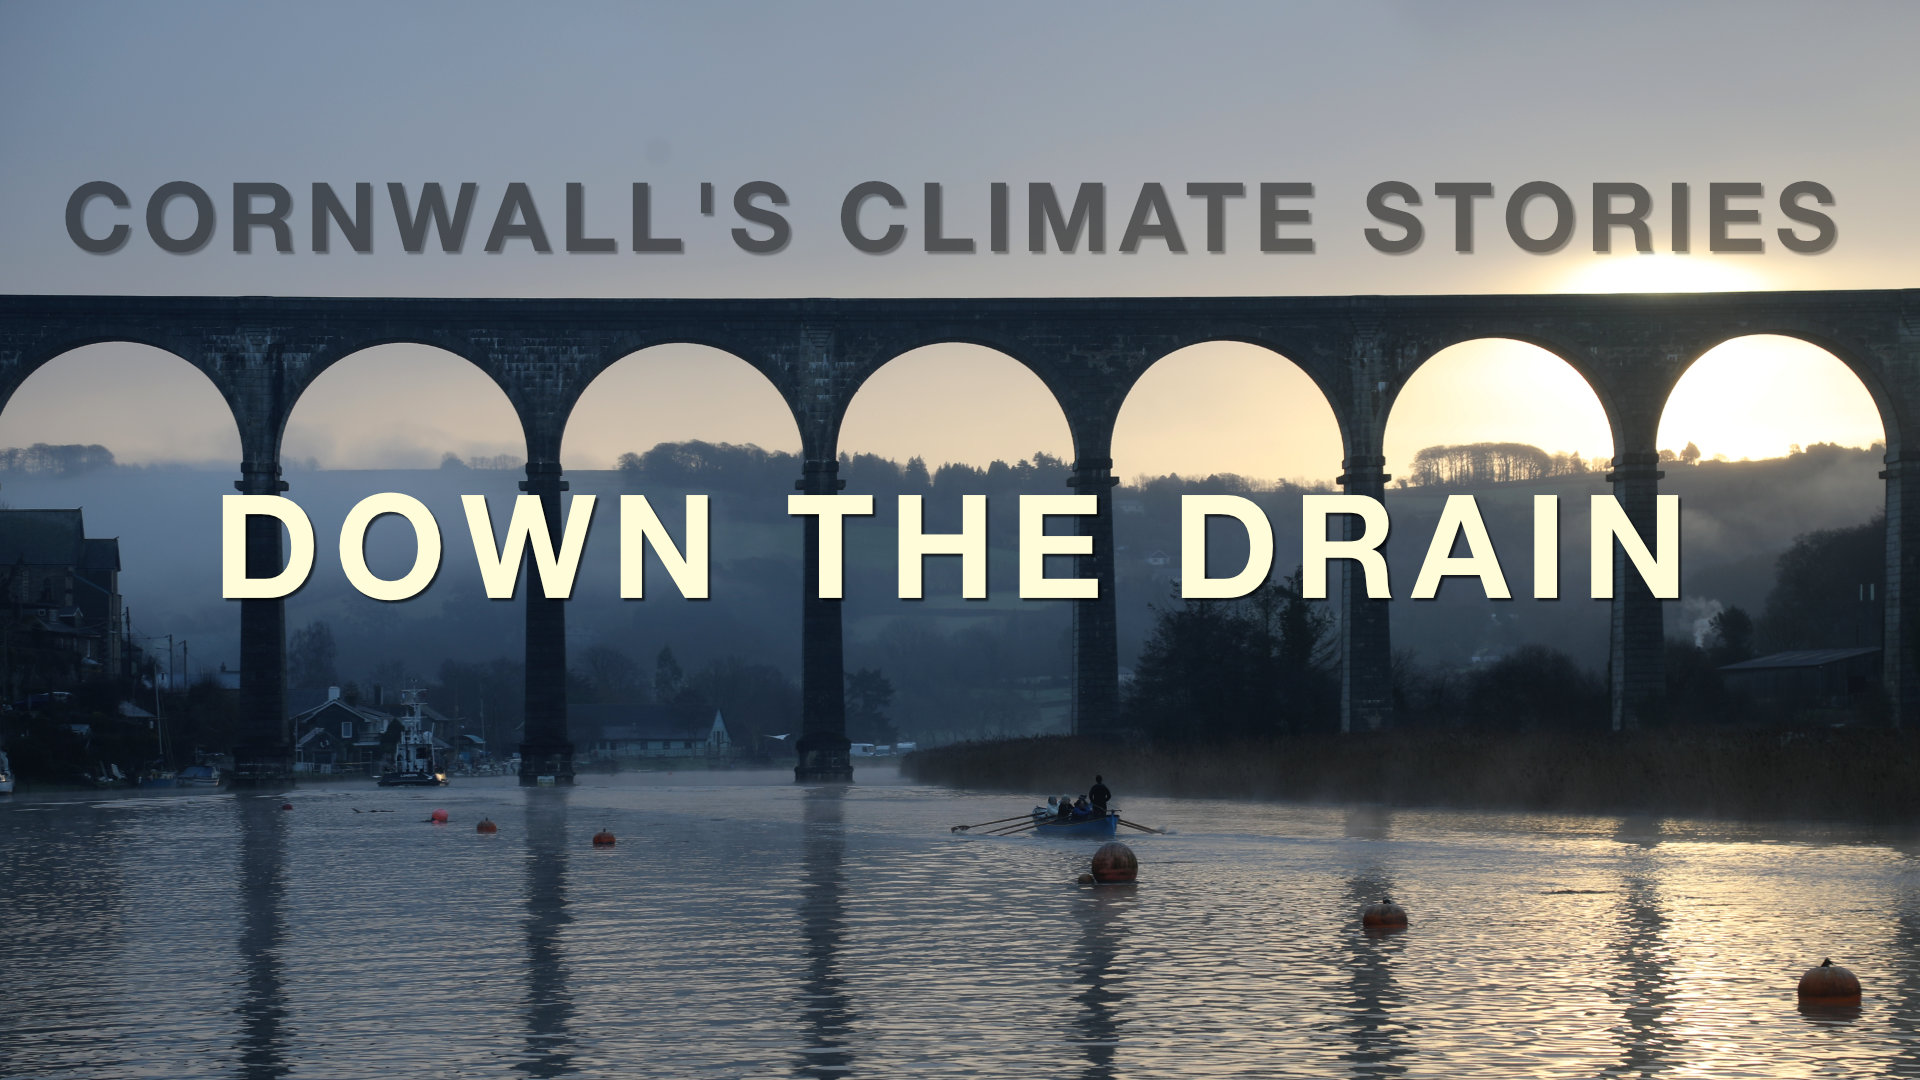 12 June: Cornwall’s Climate Story – Down the Drain